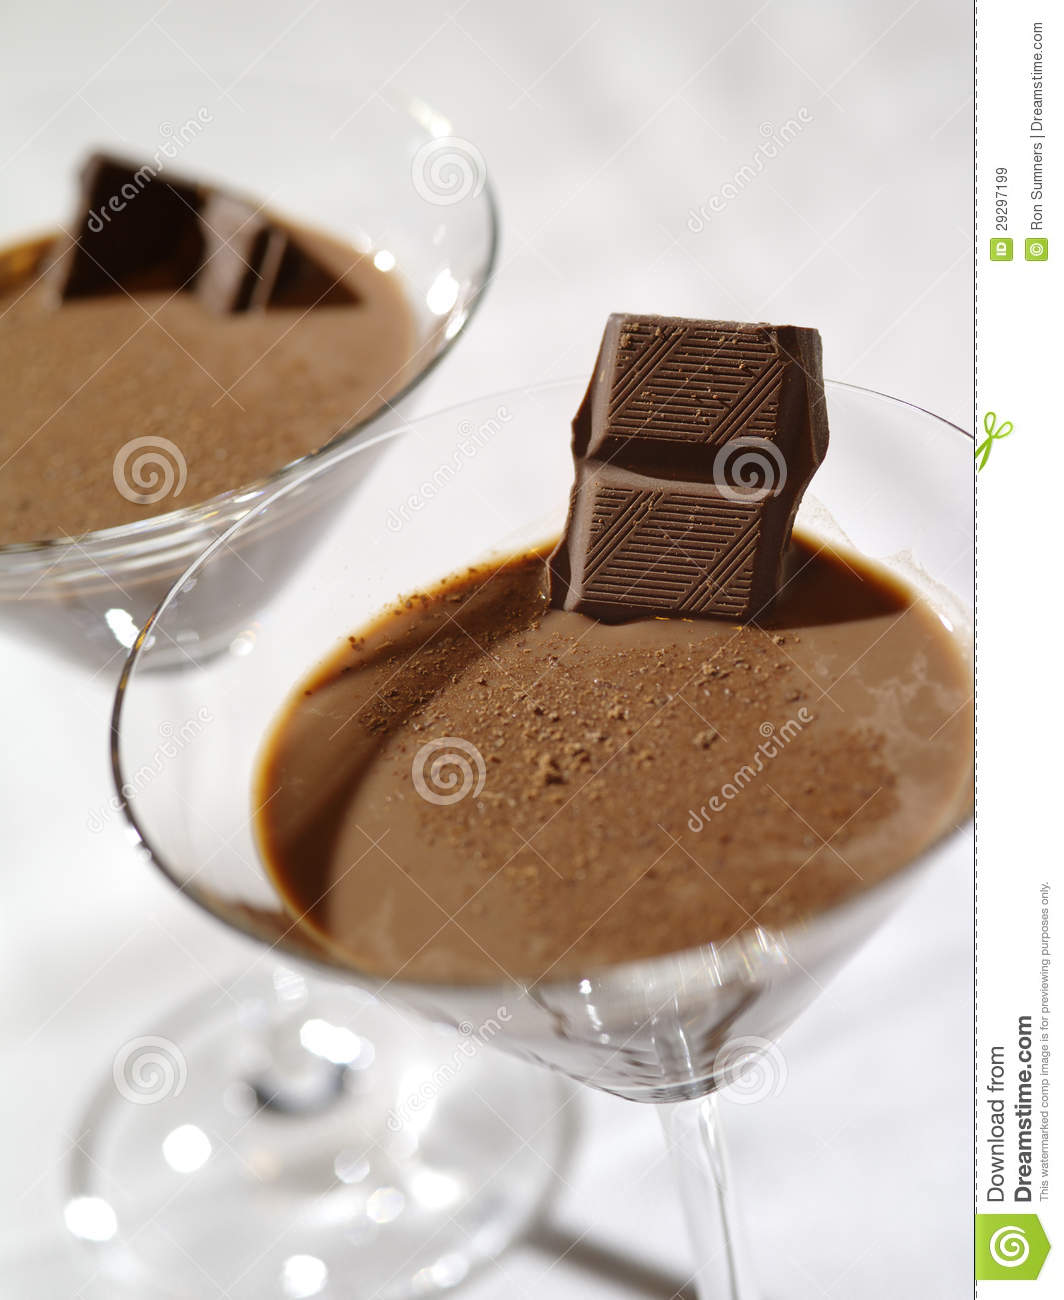 Photo Of Two Chocolate Martinis With A Very Shallow Depth Of Field